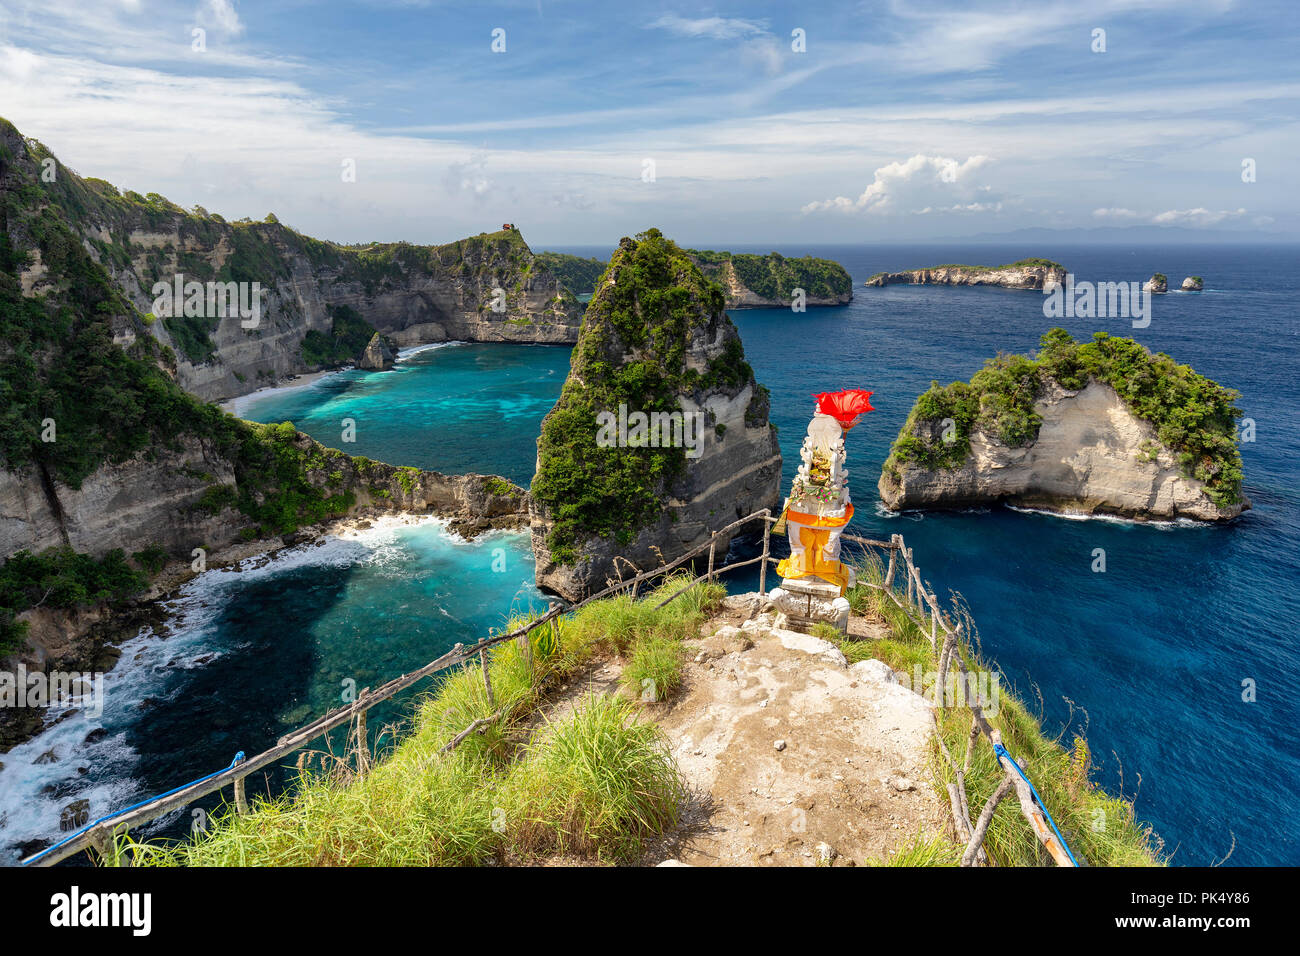 Small Raja Lima islands with a beautiful shrine in the foreground on Nusa Penida in Indonesia. Stock Photo